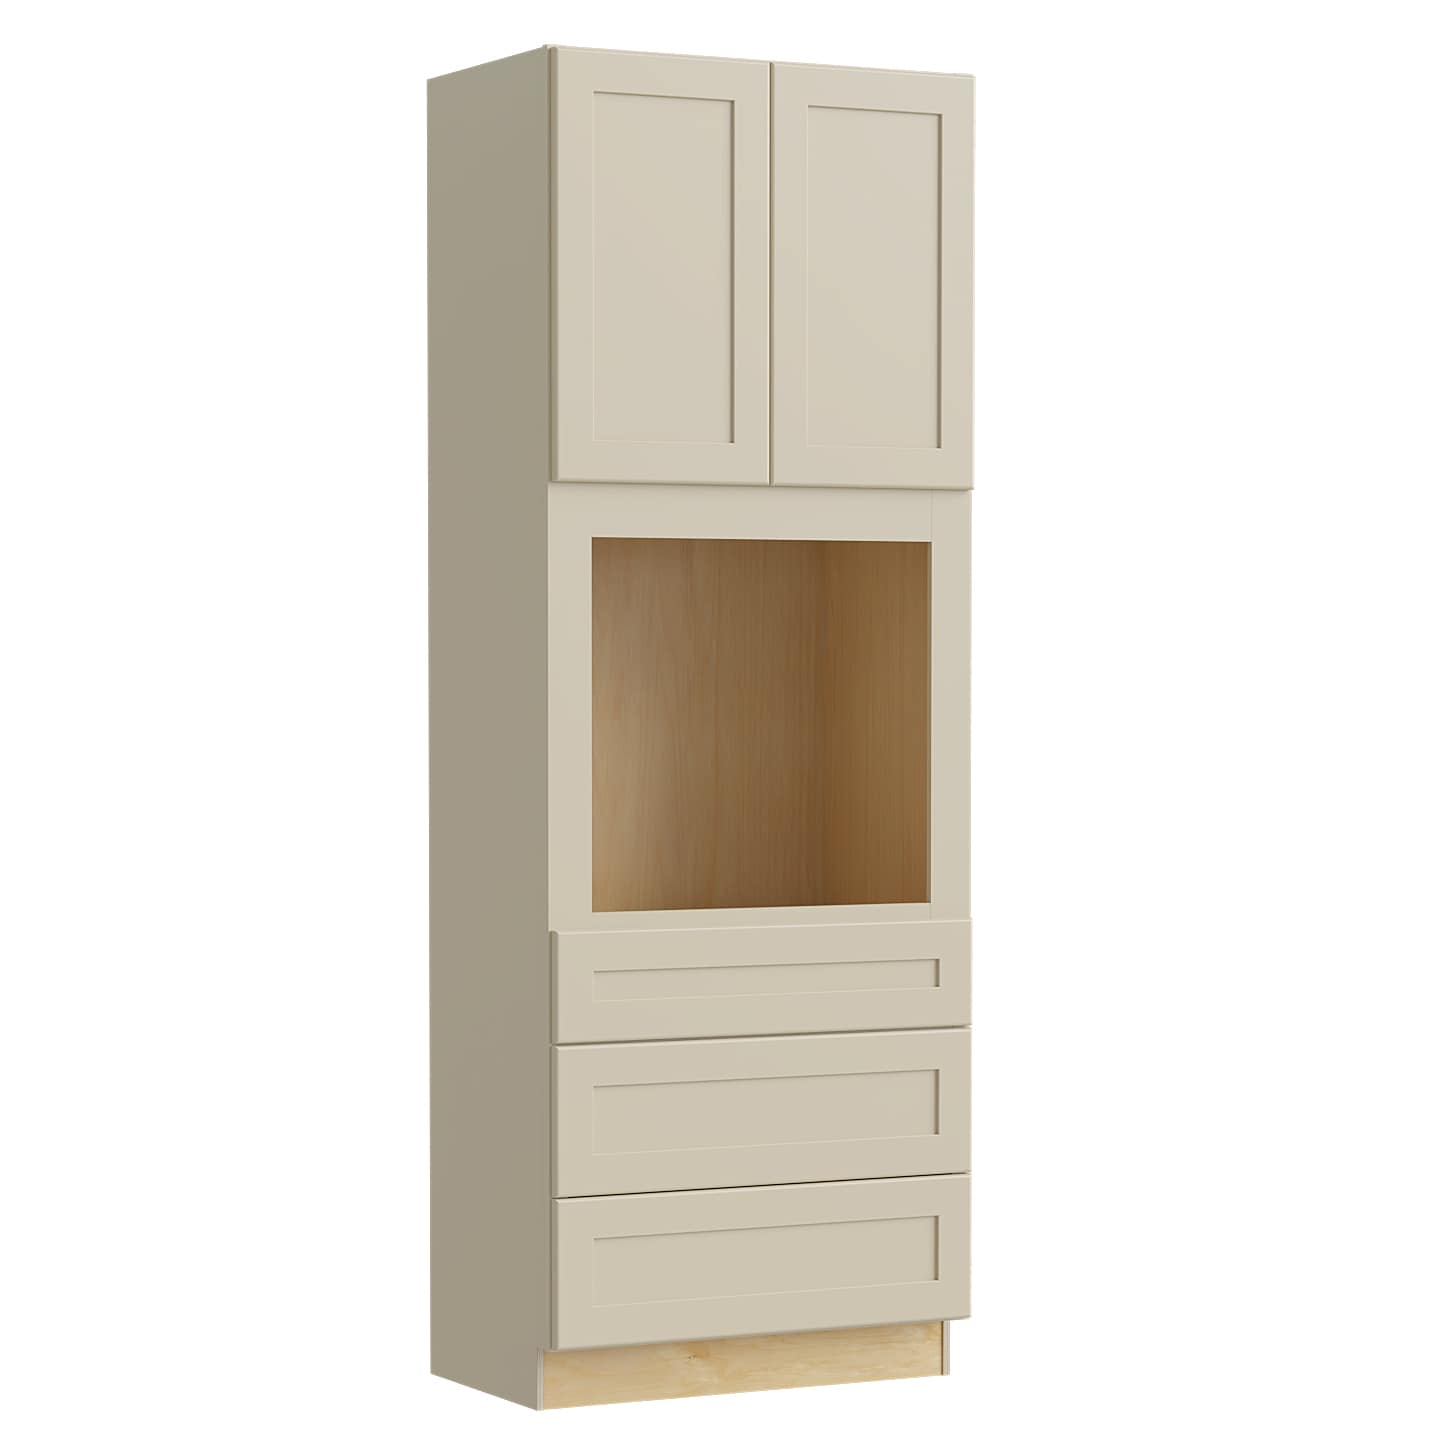 Luxxe Cabinetry 33-in W x 90-in H x 24-in D Norfolk Blended Cream Painted Drawer Base Fully Assembled Semi-custom Cabinet in Off-White | OC332490U-NBC